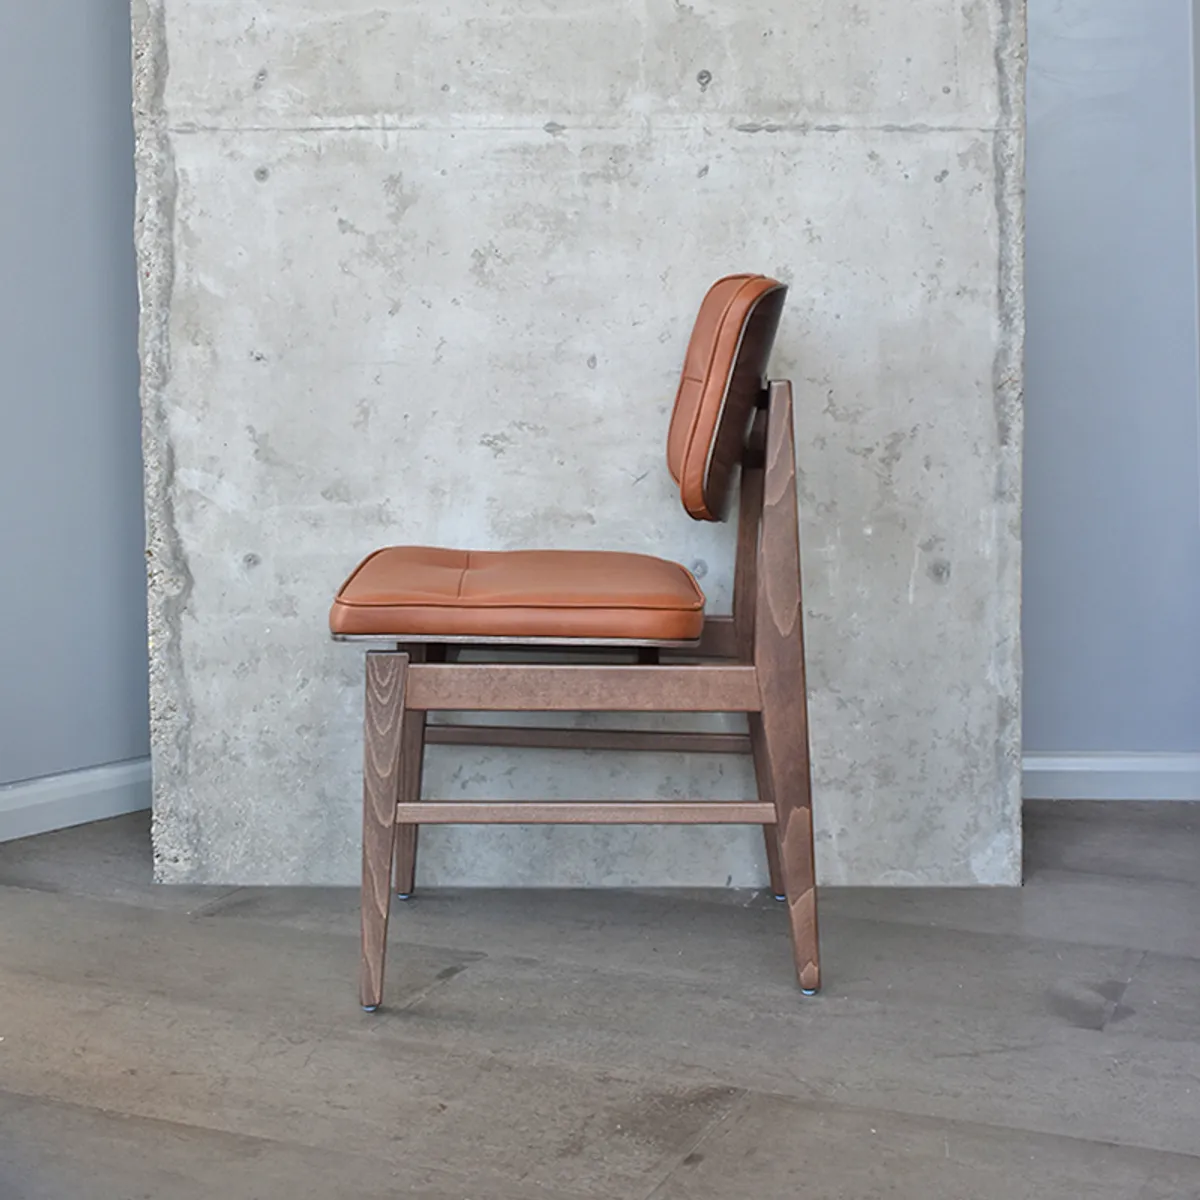 Hardwick Side Chair New Furniture From Milan 2019 By Inside Out Contracts 020